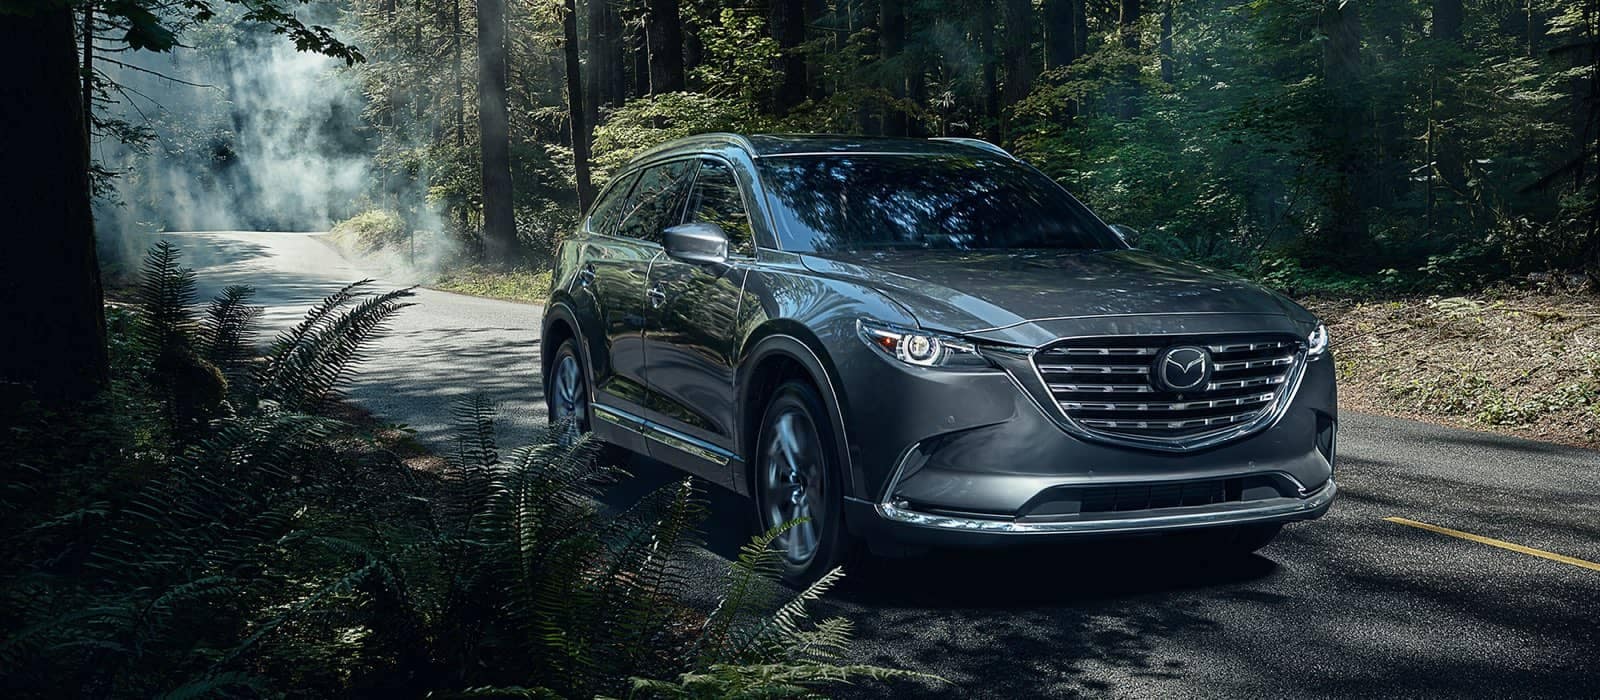 2021 Mazda CX-9 driving in the woods